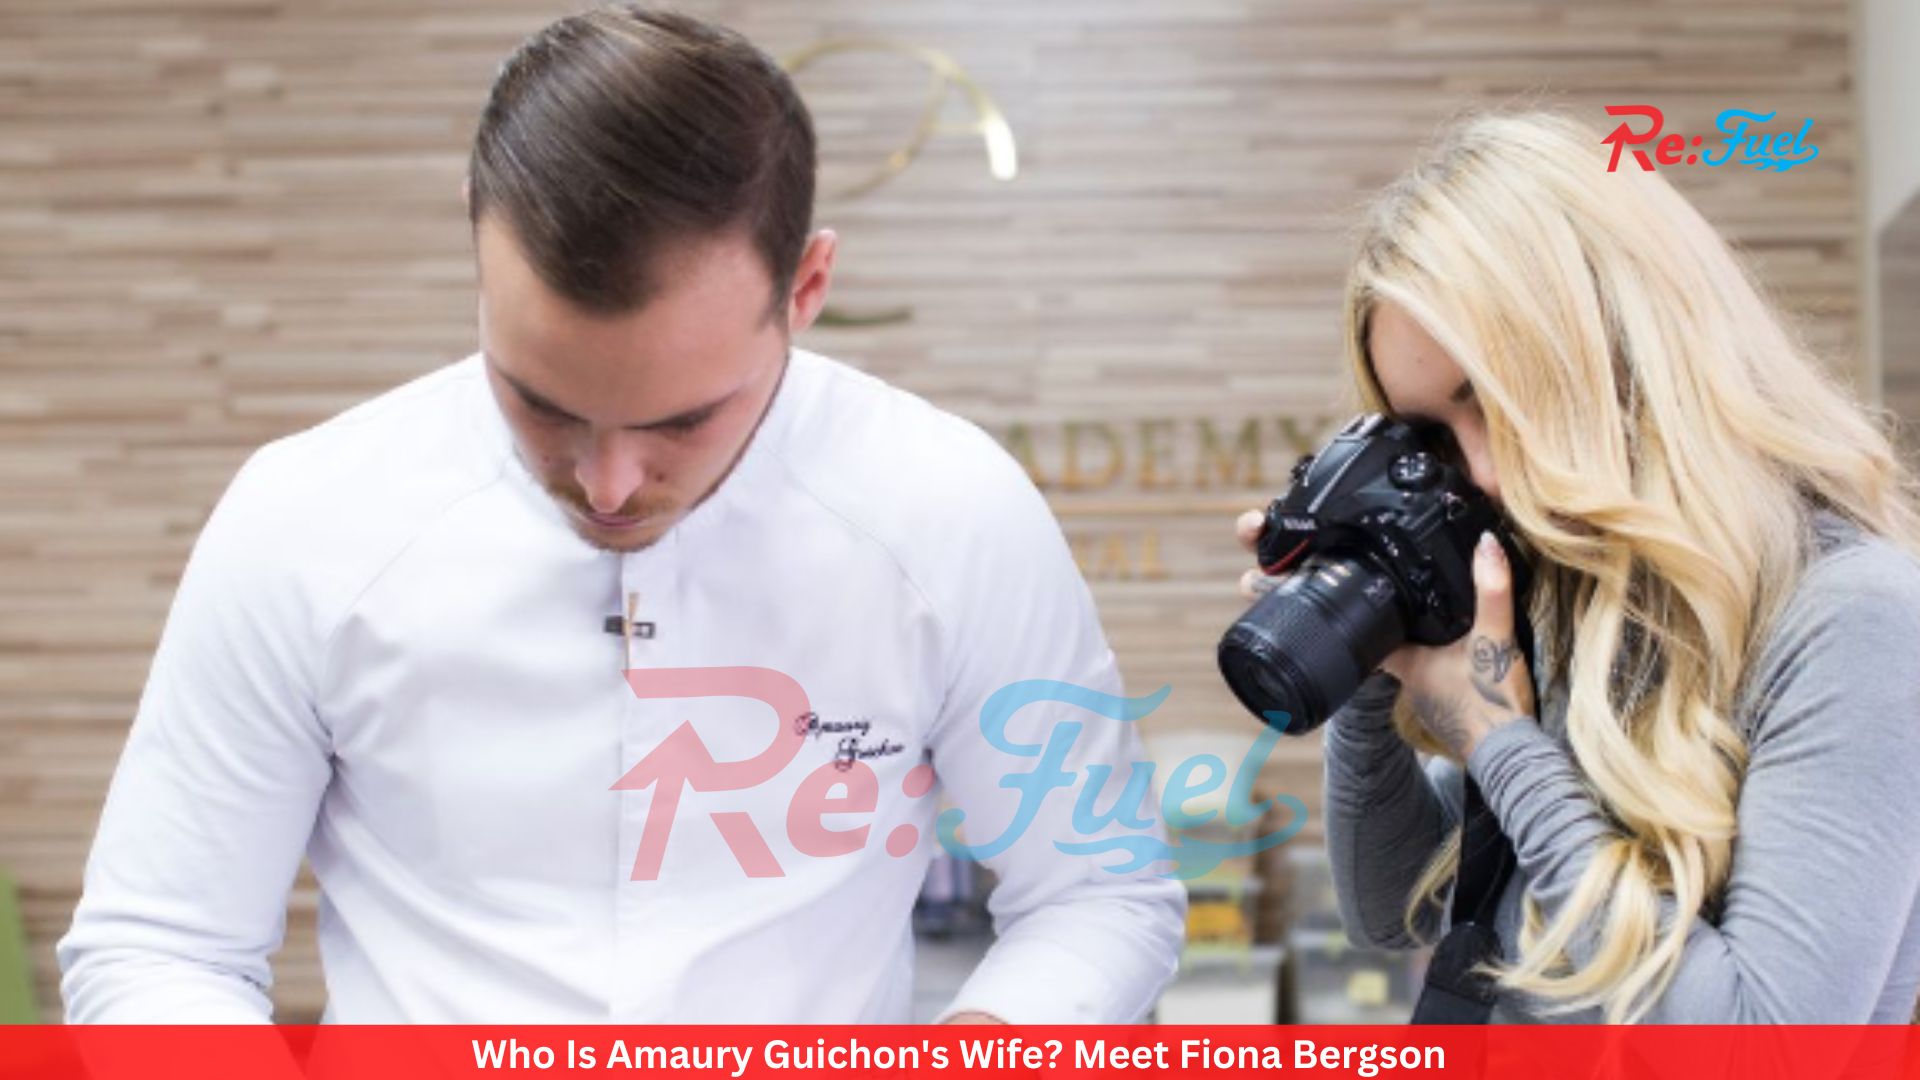 Who Is Amaury Guichon's Wife? Meet Fiona Bergson